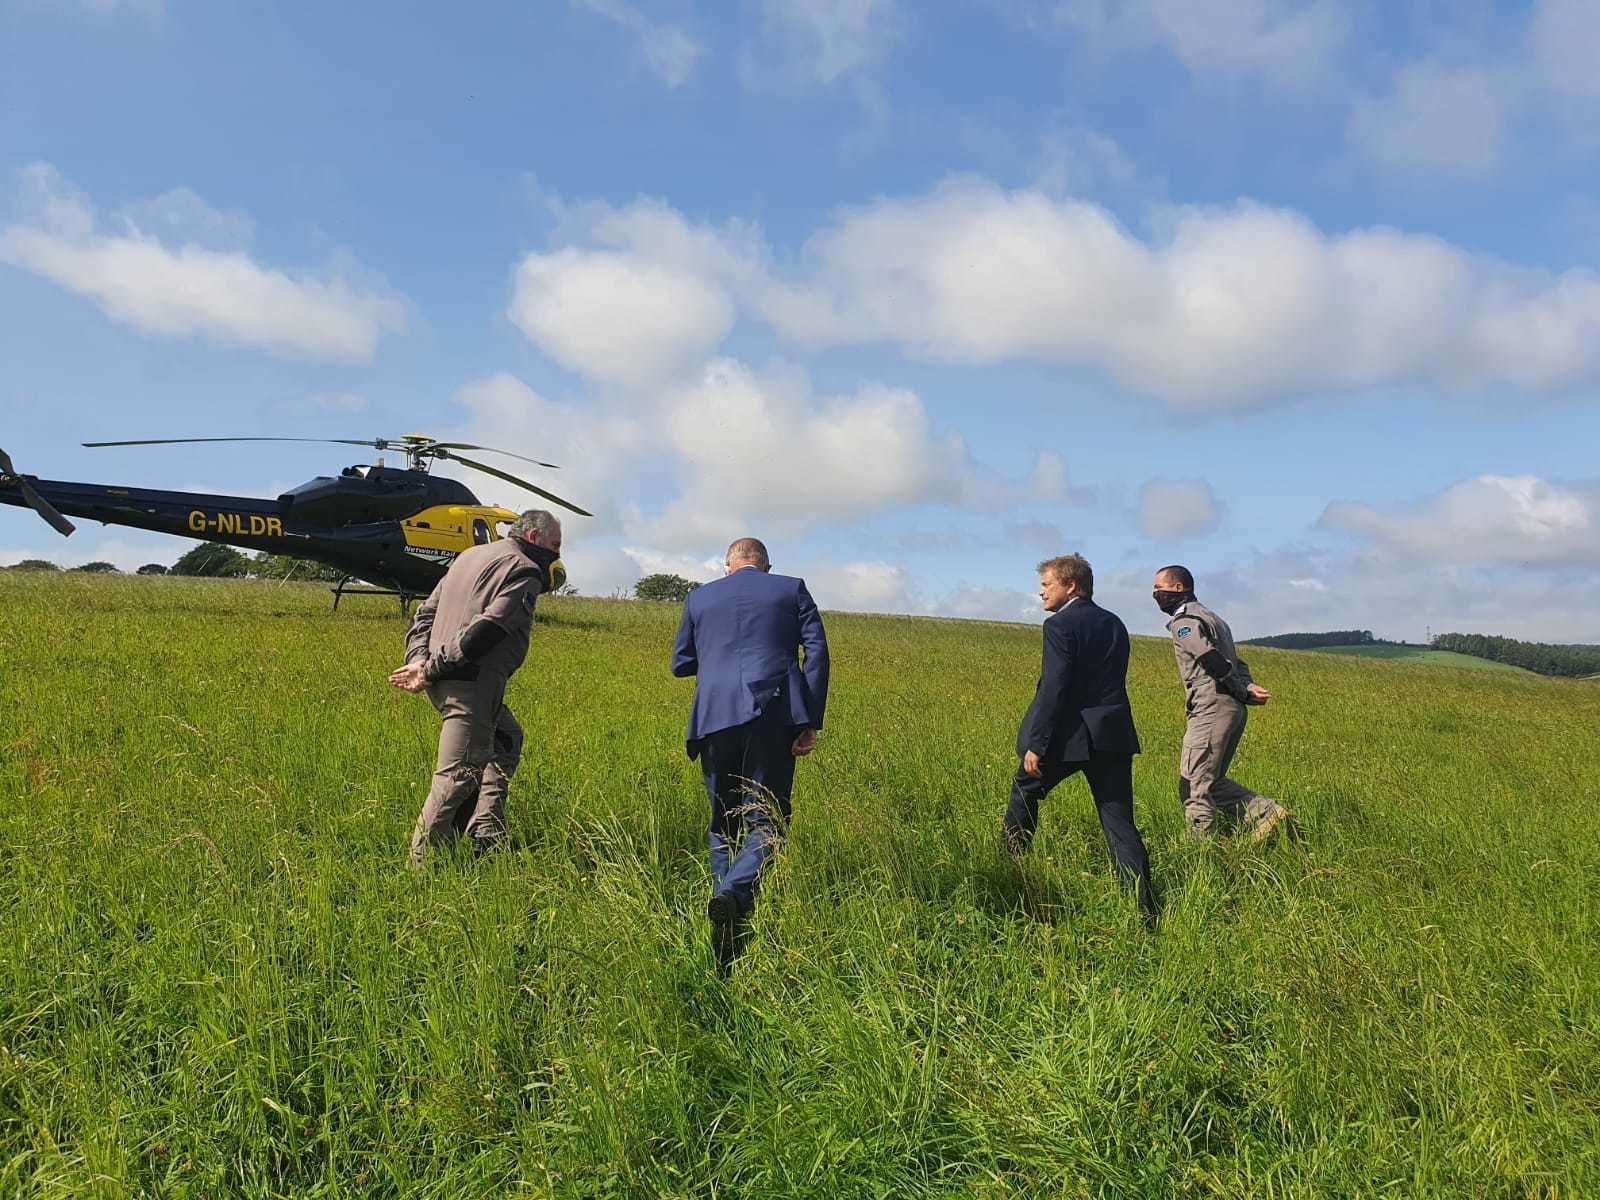 Andrew Haines (second left) and Transport Minister Grant Schapps (third left) surveyed the scene by helicopter earlier today.